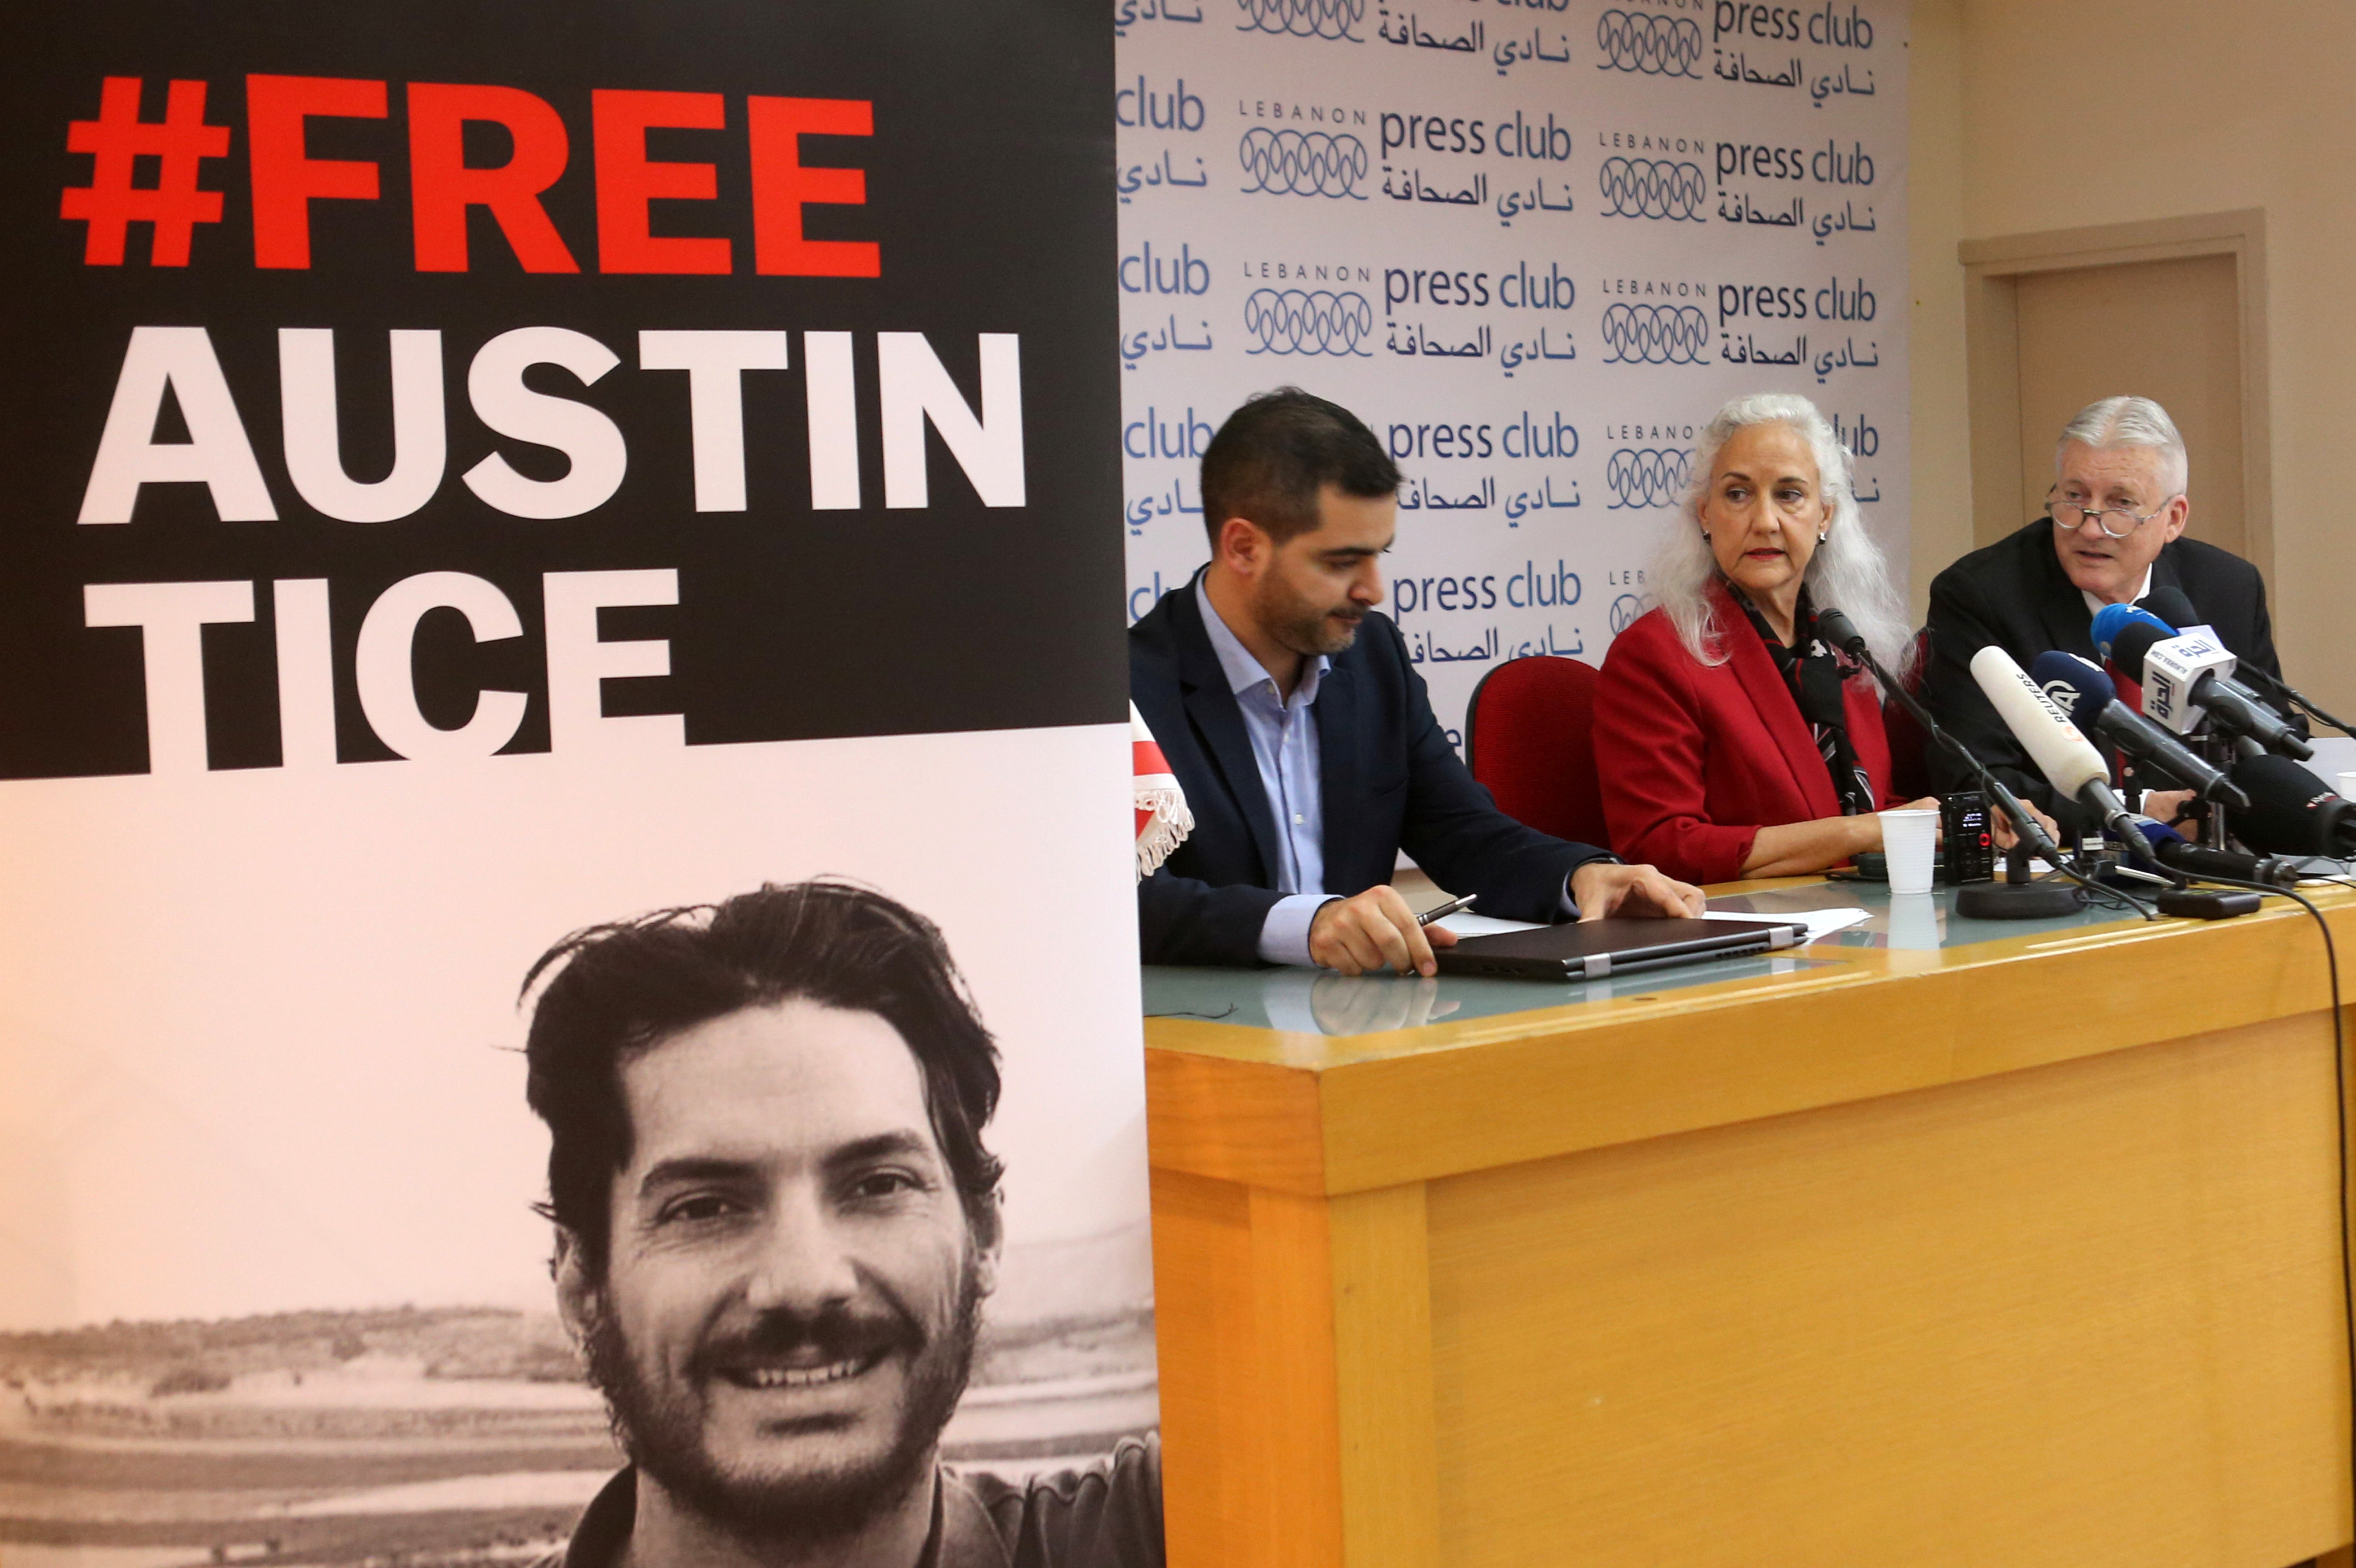 Marc and Debra Tice, parents of U.S. journalist Austin Tice, talk during a news conference in Beirut